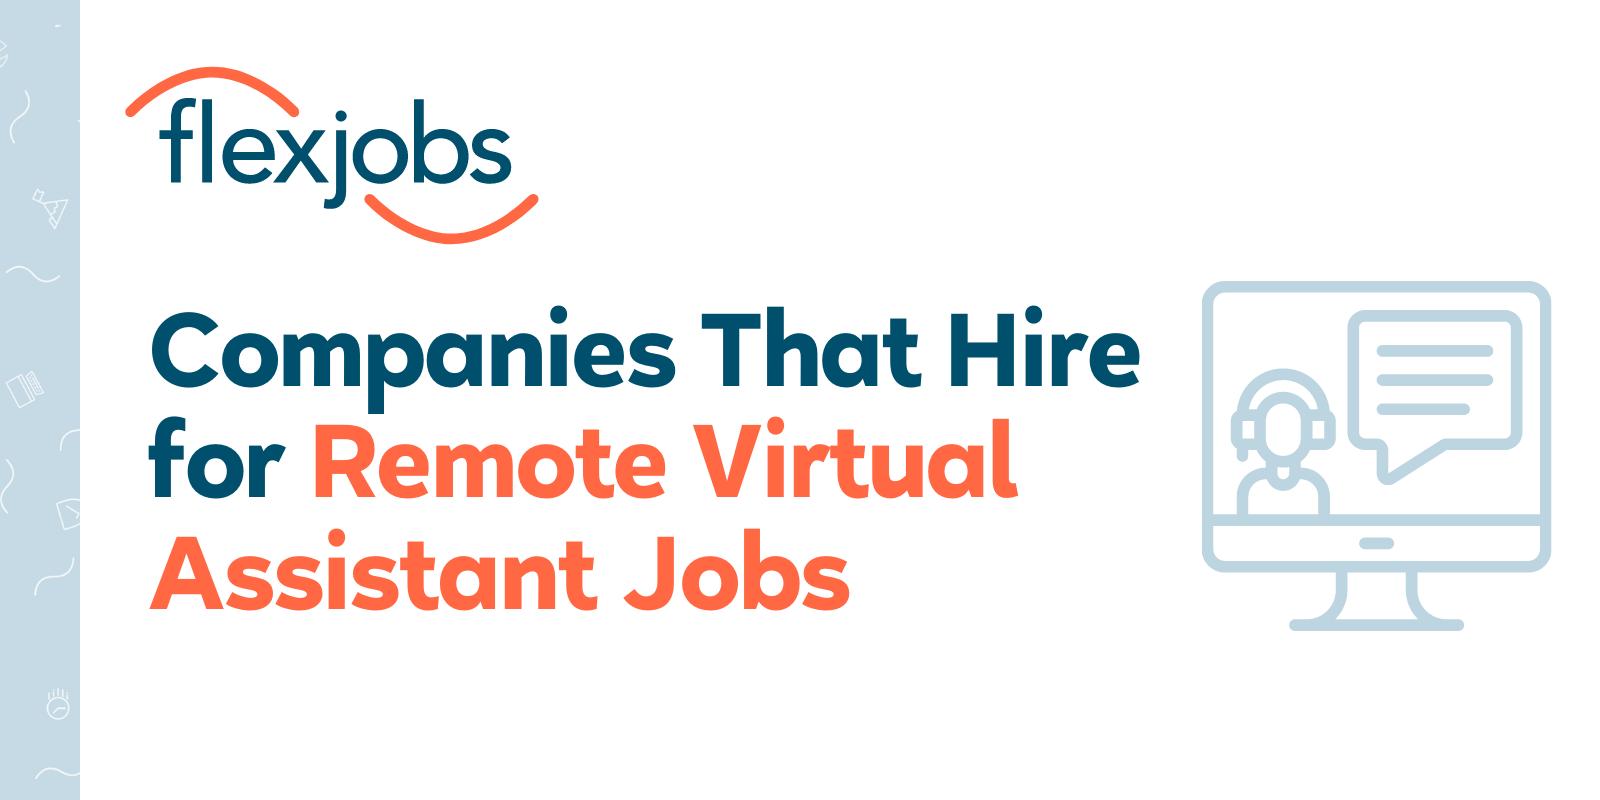 Best Work From Home Jobs 2021 No Experience: Best Virtual Assistant Jobs for No Experience in 2021